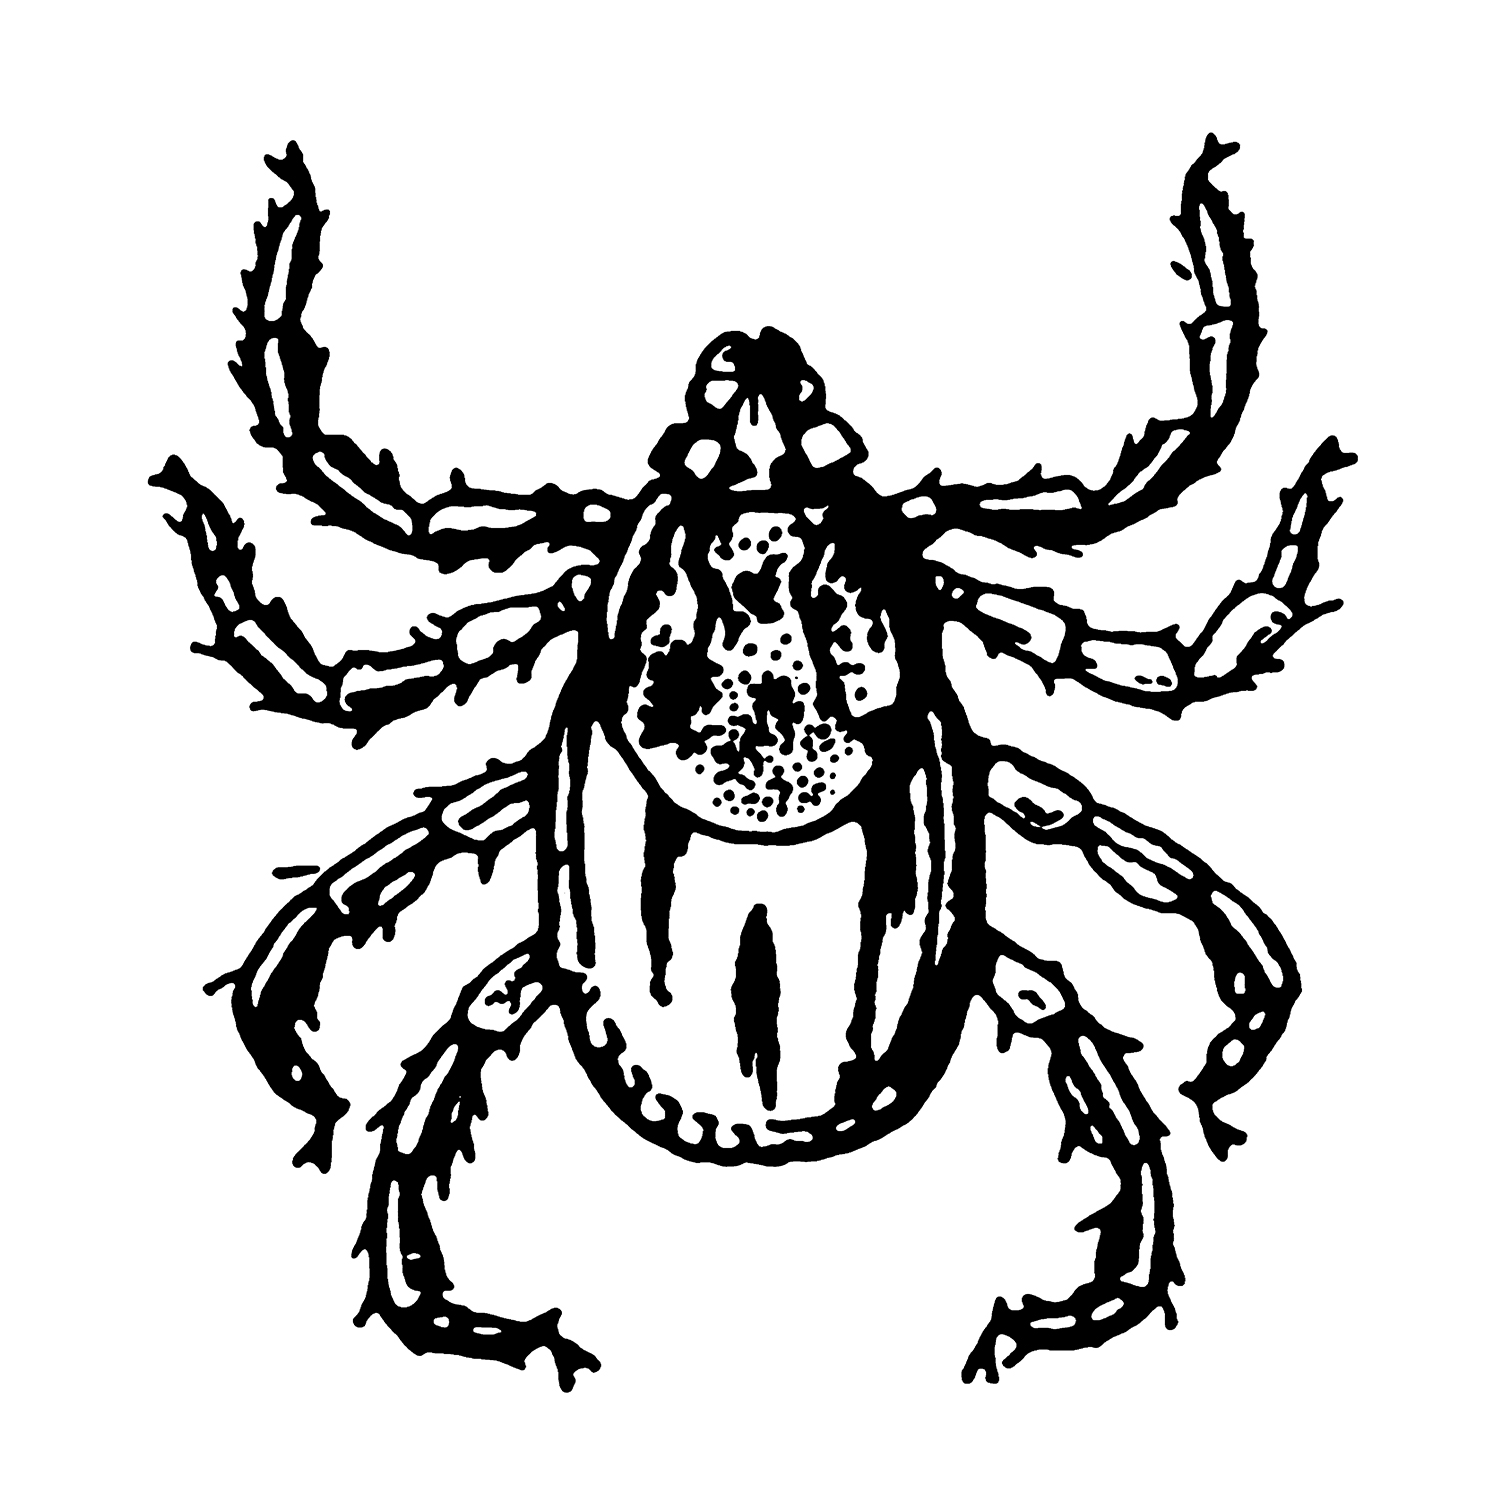 Drawing of a tick